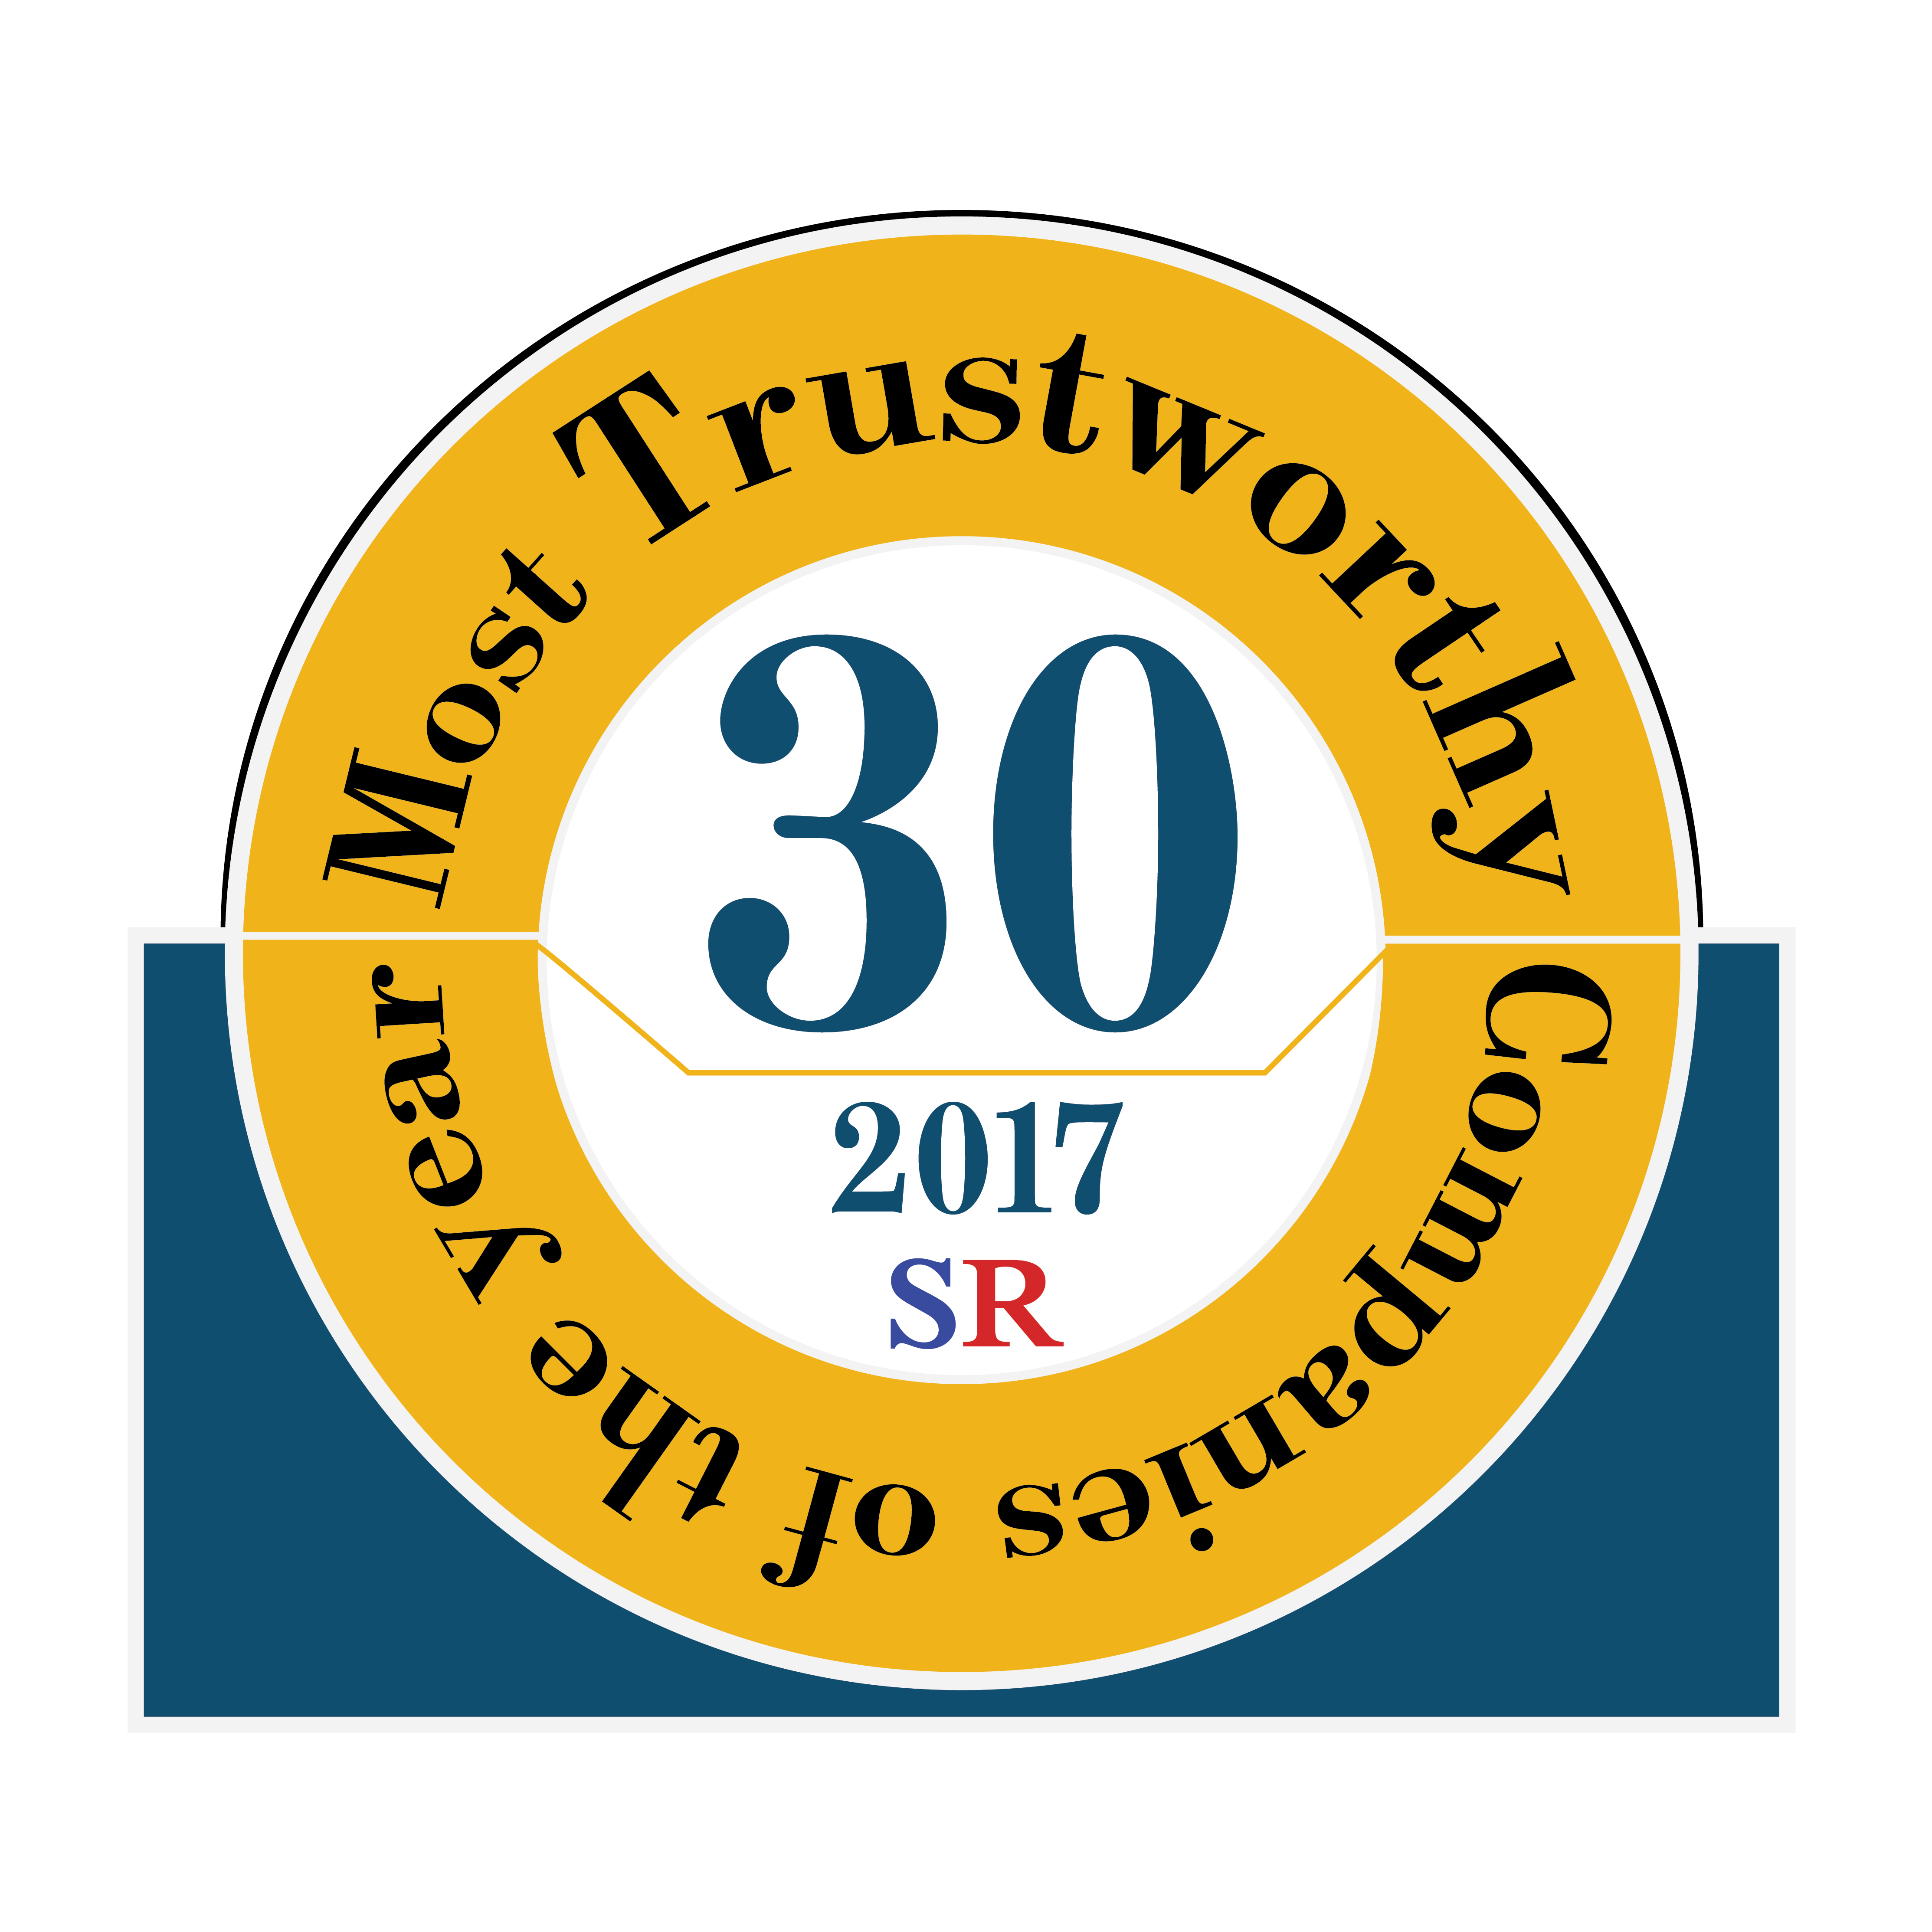 Maine Pointe Named Among '30 Most Trustworthy Companies of 2017' by The Silicon Review Magazine